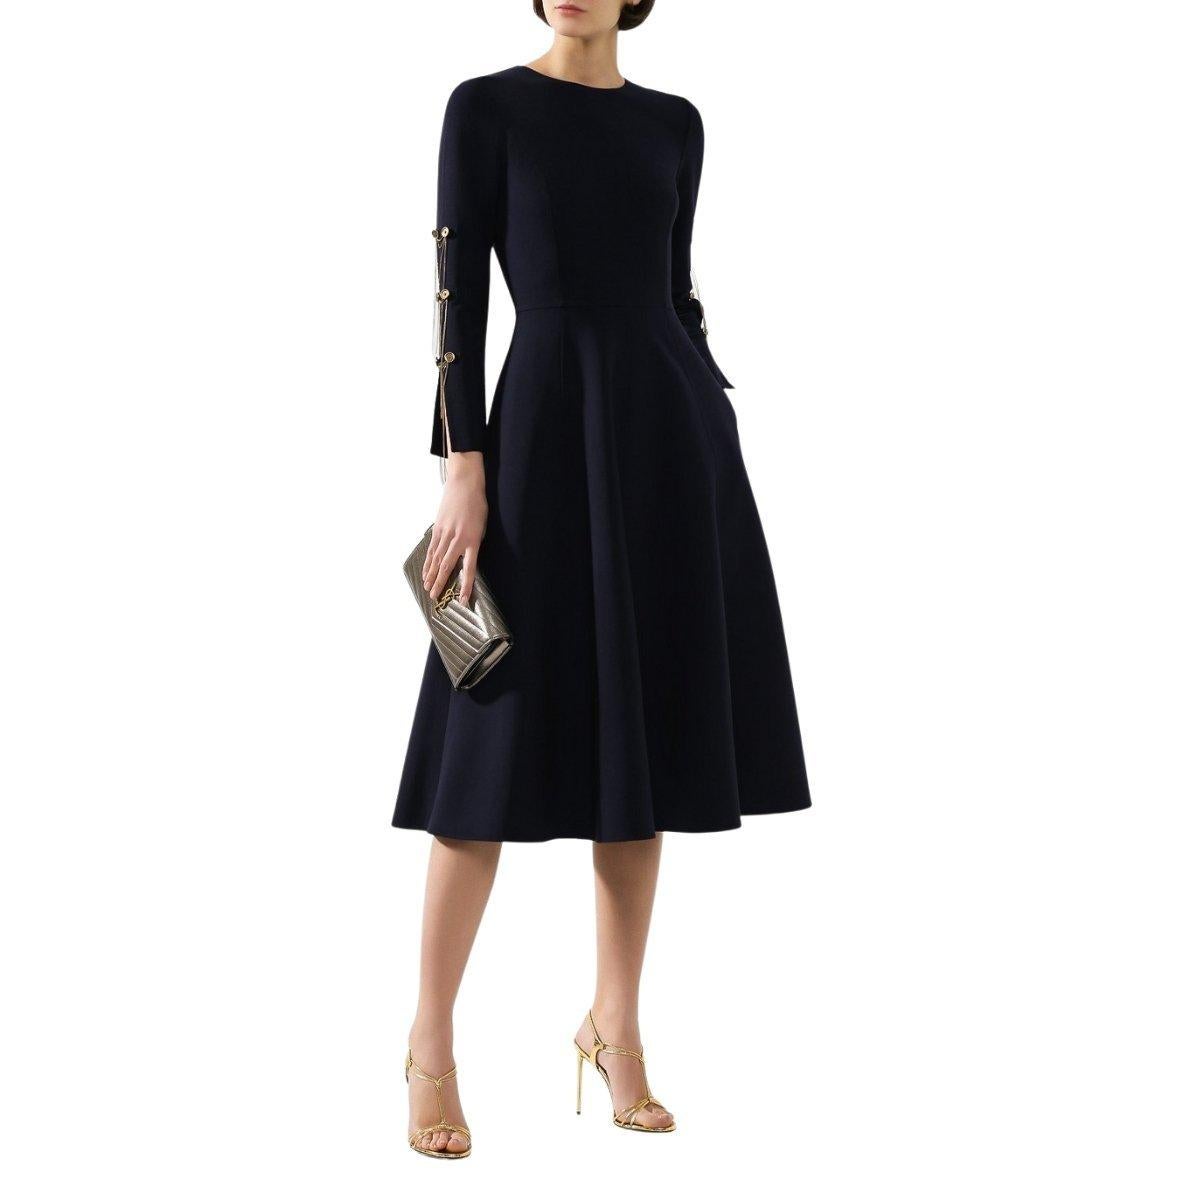 Dark blue dress
High slits on the sleeves
Decoration with gold pendants
Flared model of thin elastic wool.
Two side pockets
Round neck
Long sleeves
Concealed zip fastening at the back
Medium length
Dry cleaning
Composition: 94% wool, 5% lycra; 1%